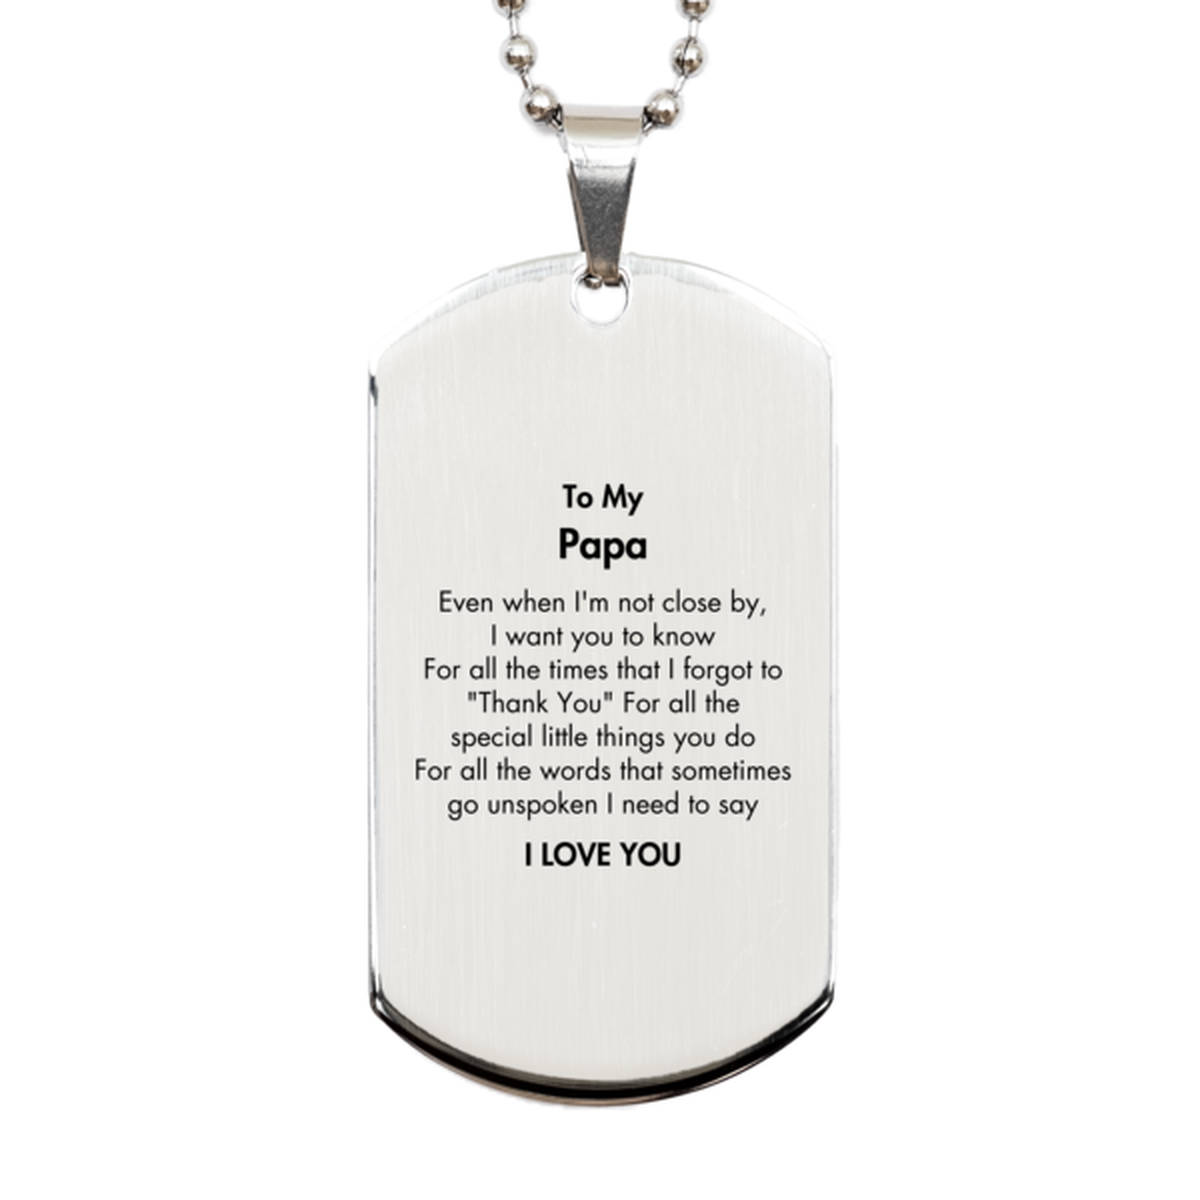 Thank You Gifts for Papa, Keepsake Silver Dog Tag Gifts for Papa Birthday Mother's day Father's Day Papa For all the words That sometimes go unspoken I need to say I LOVE YOU